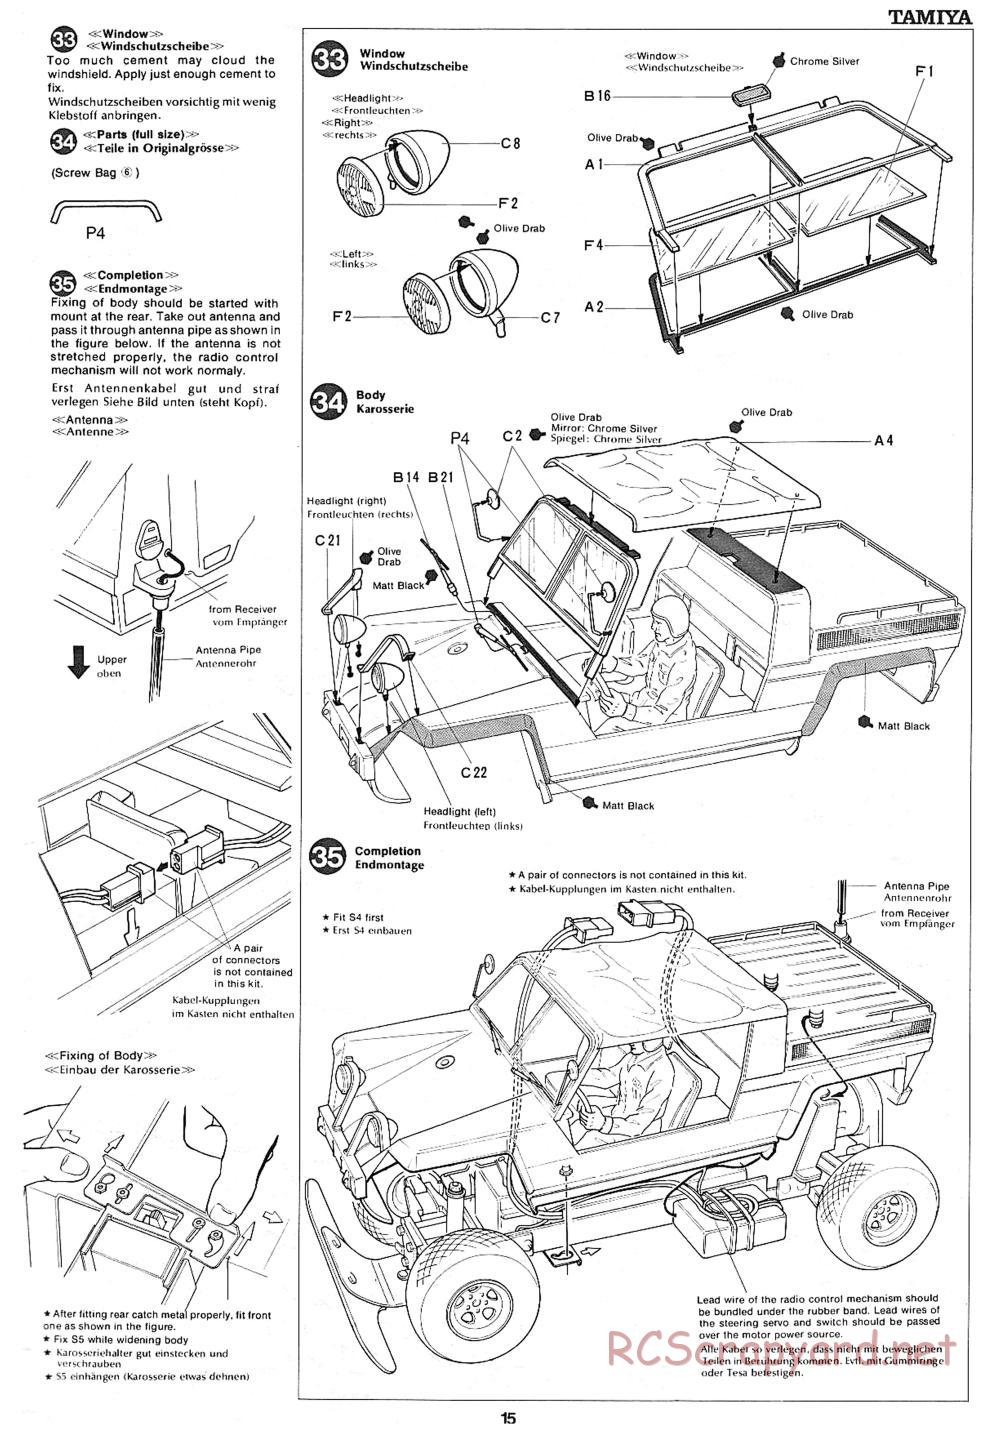 Tamiya - XR311 Combat Support Vehicle (1977) Chassis - Manual - Page 15